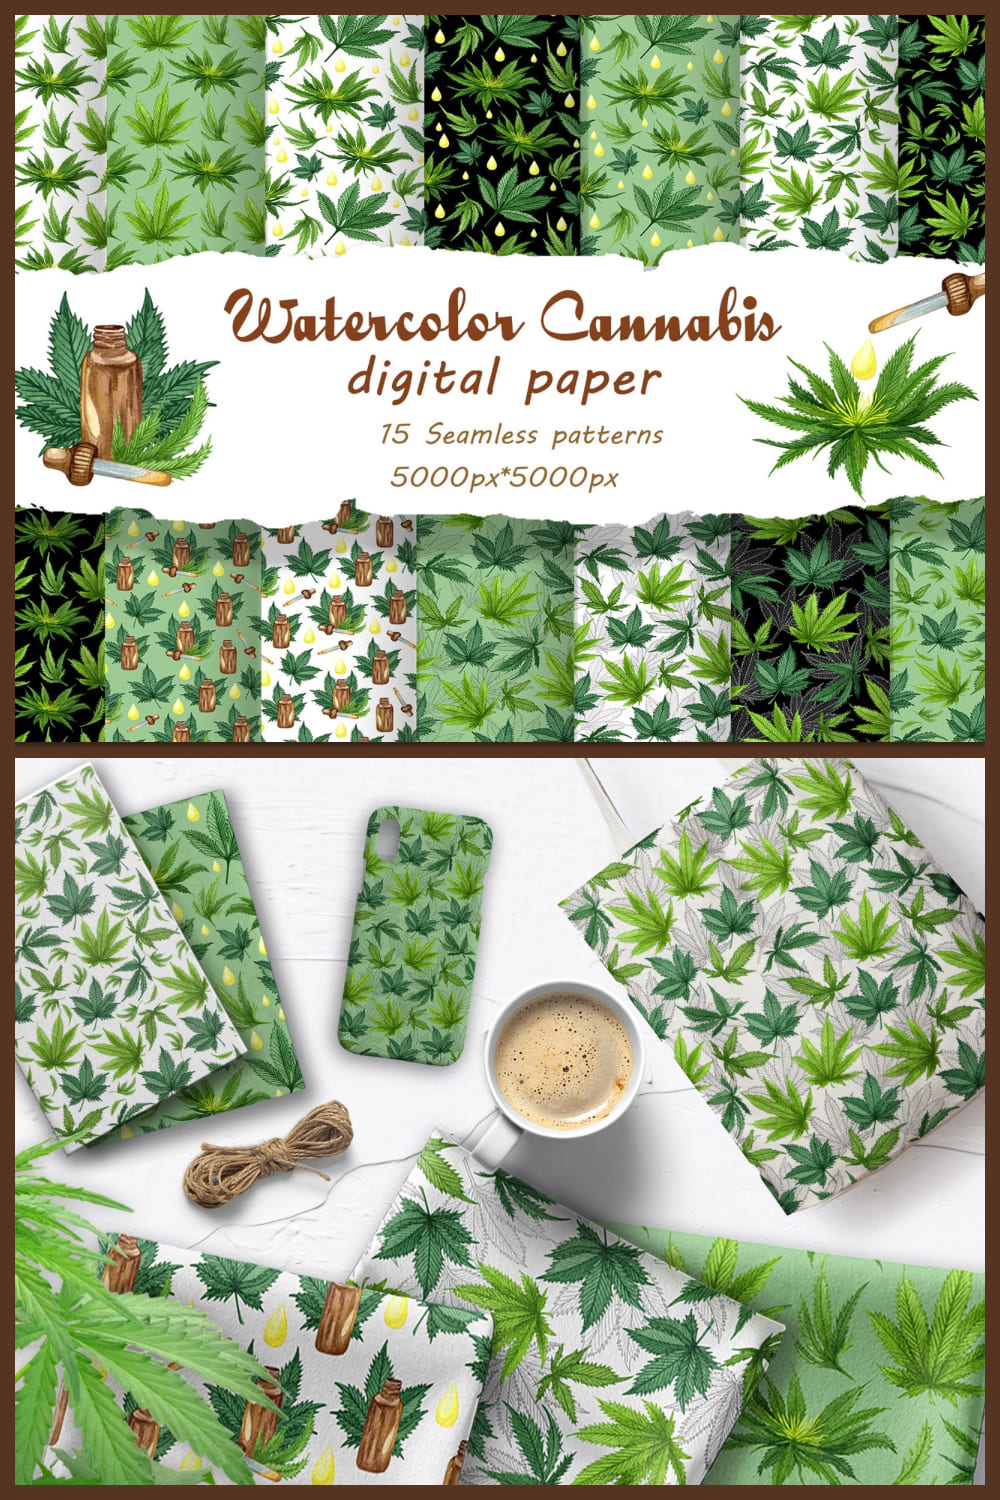 Cannabis watercolor digital papers - pinterest image preview.